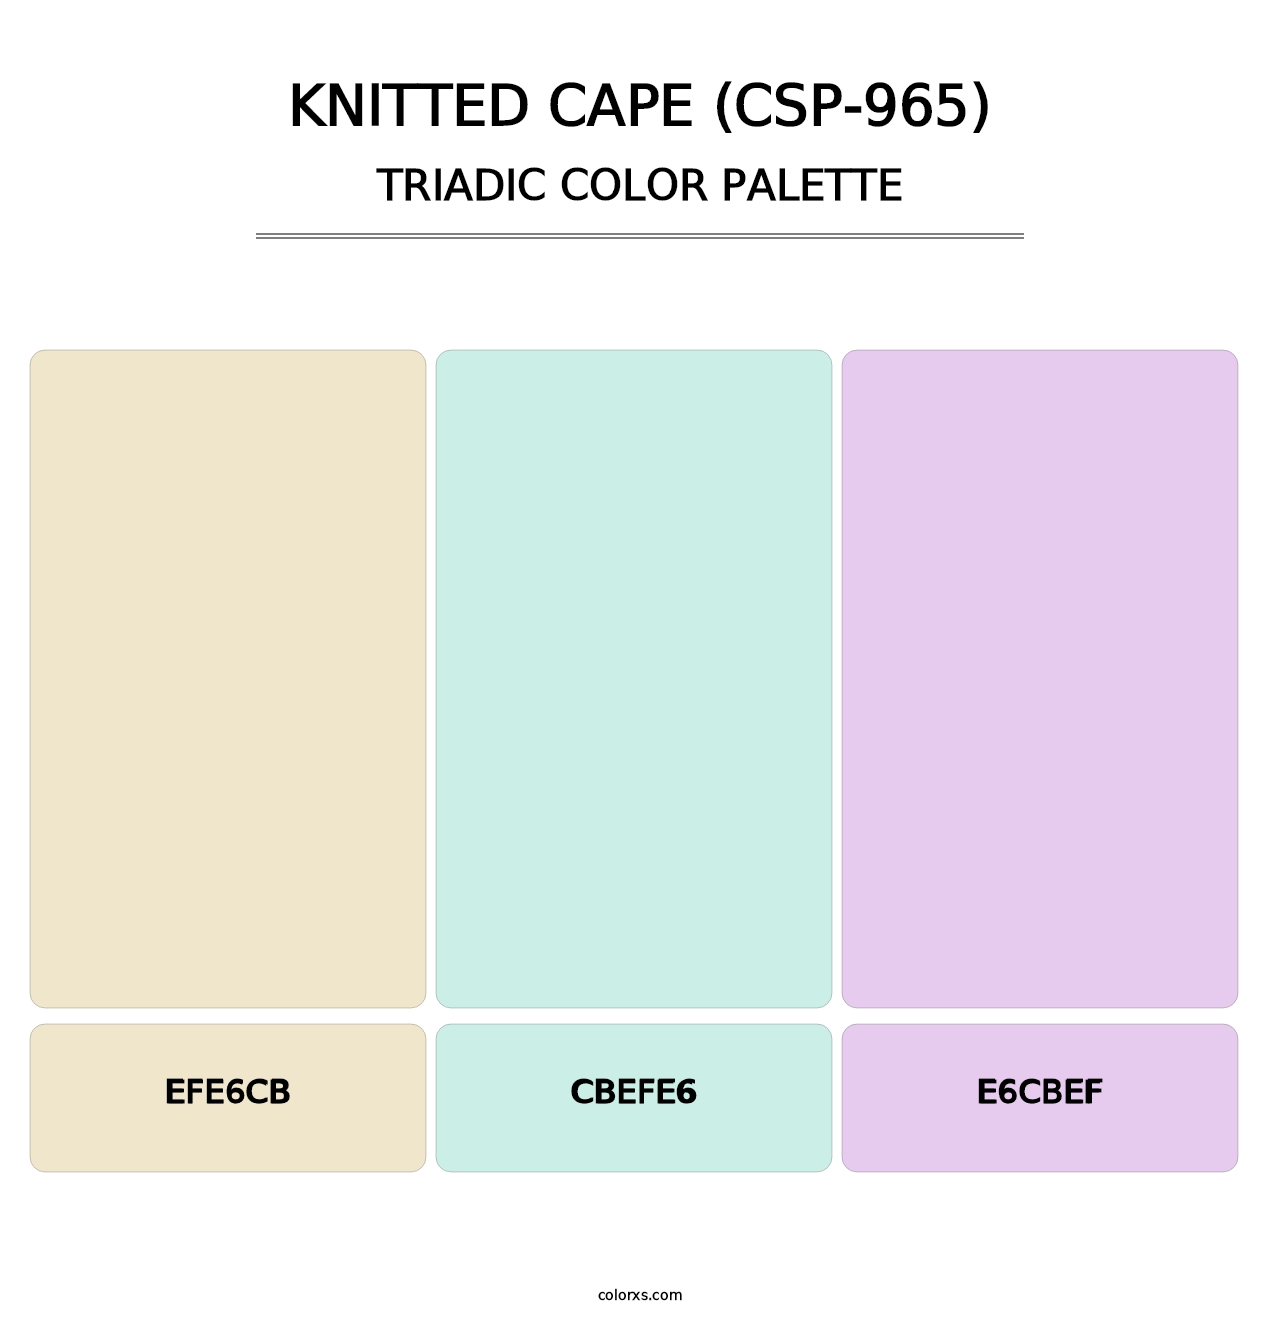 Knitted Cape (CSP-965) - Triadic Color Palette